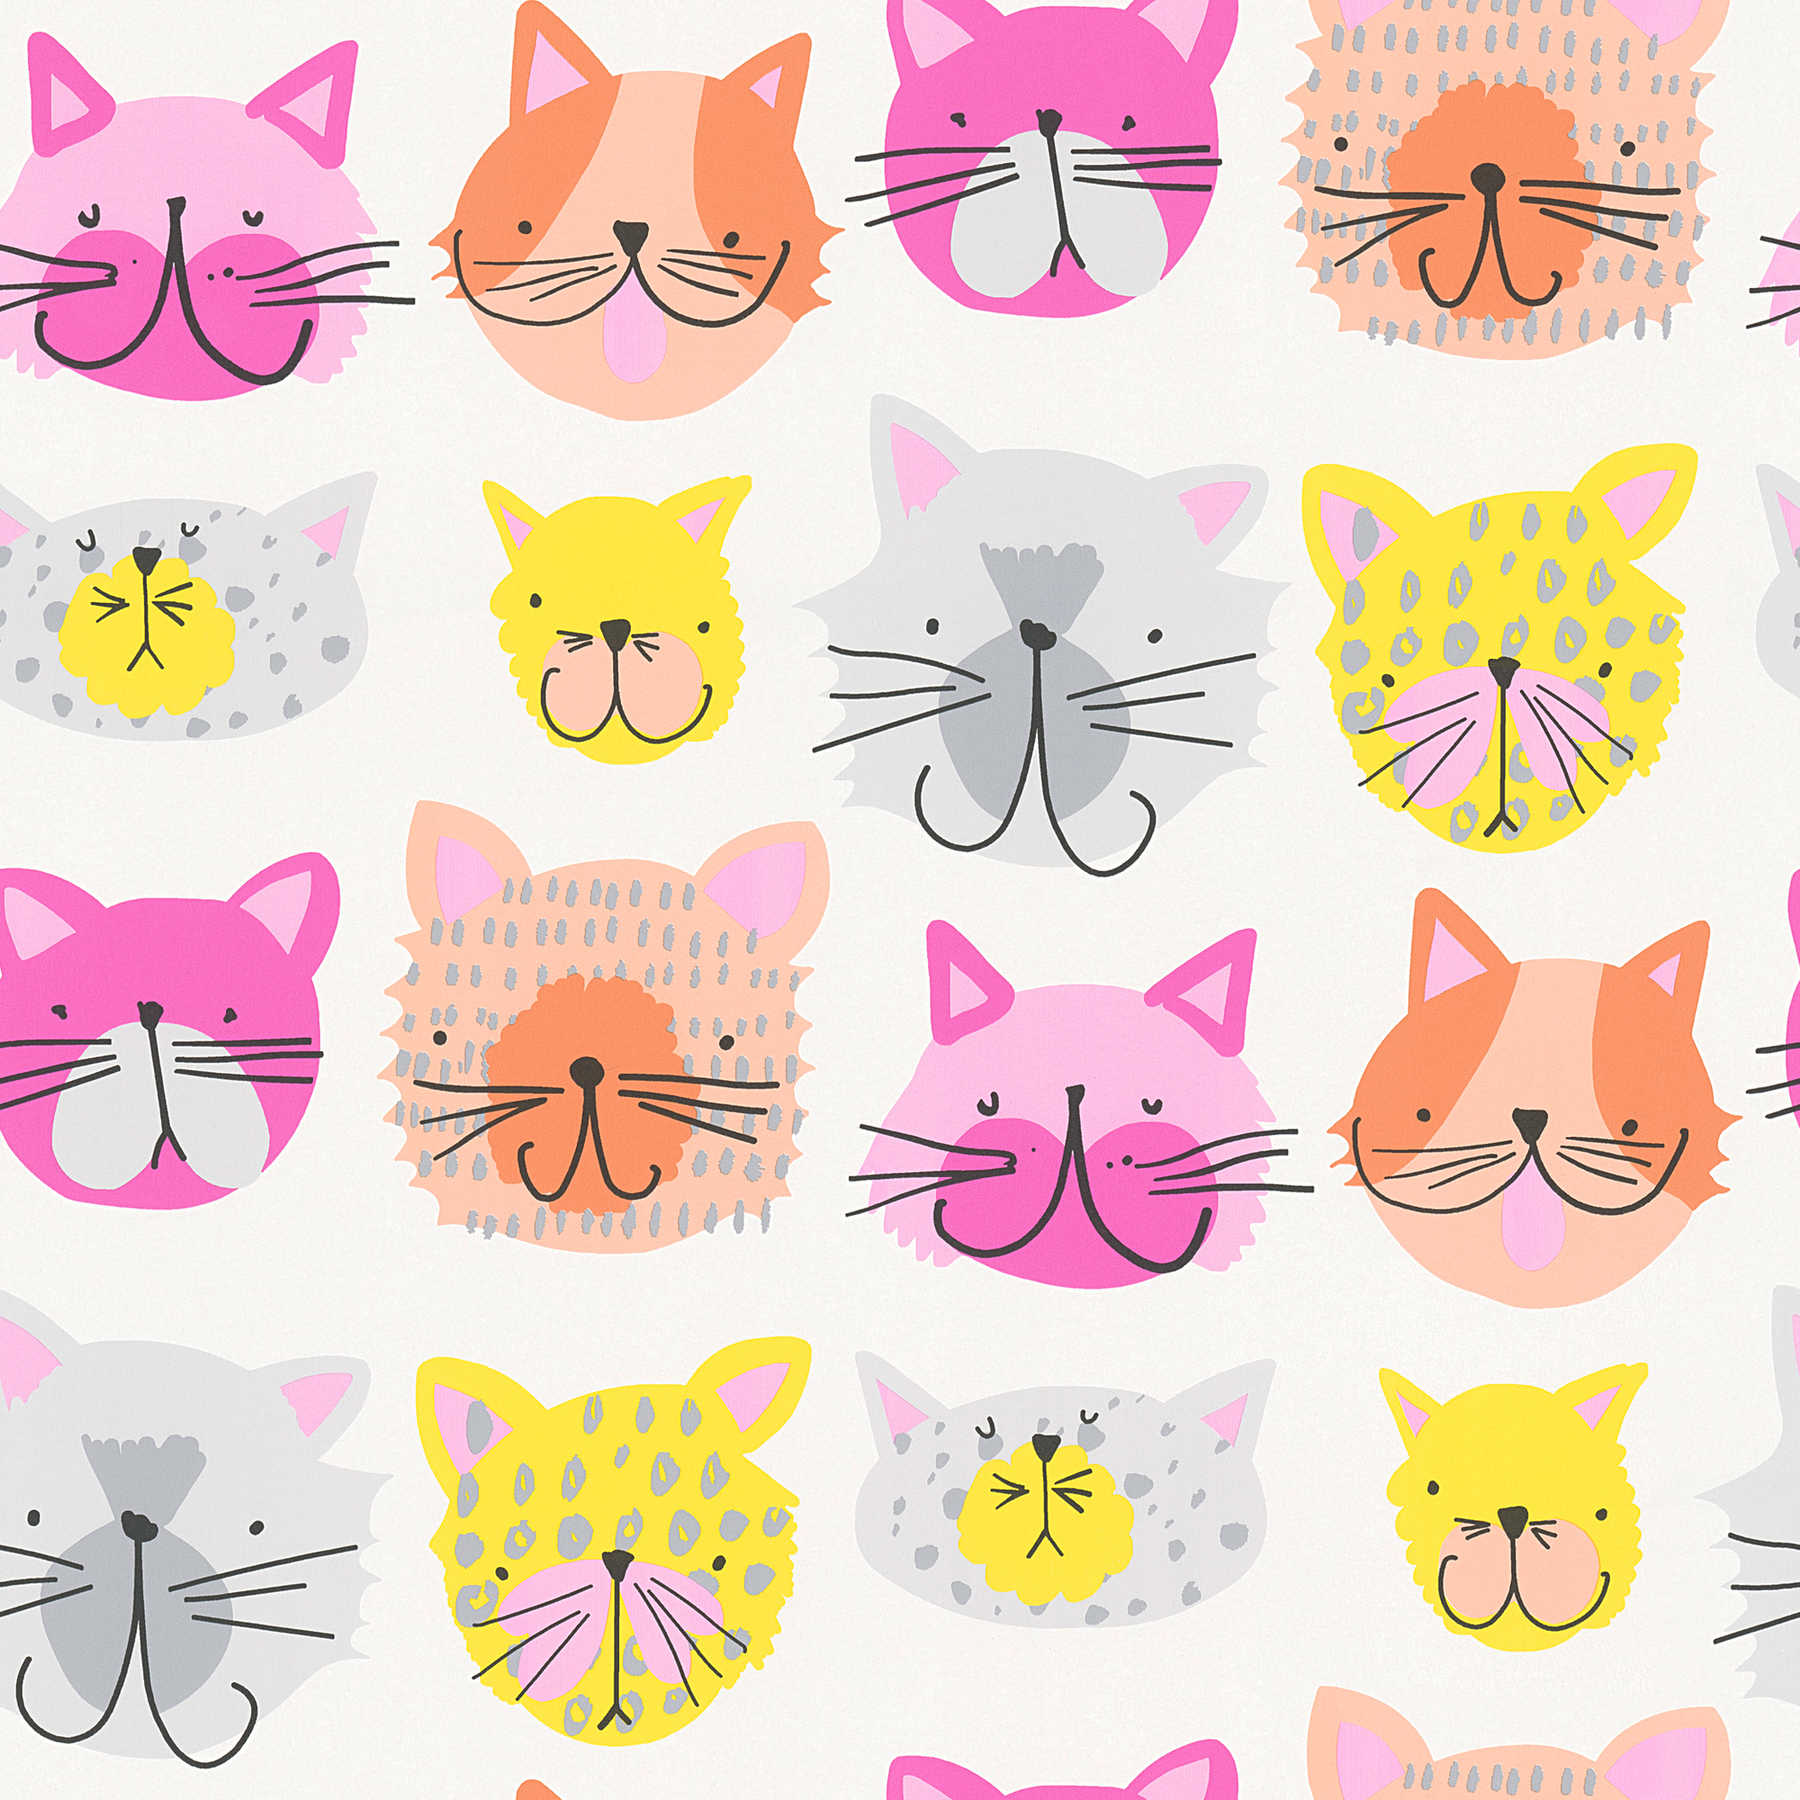 Colorful cat wallpaper in cartoon style for Nursery - pink, yellow
